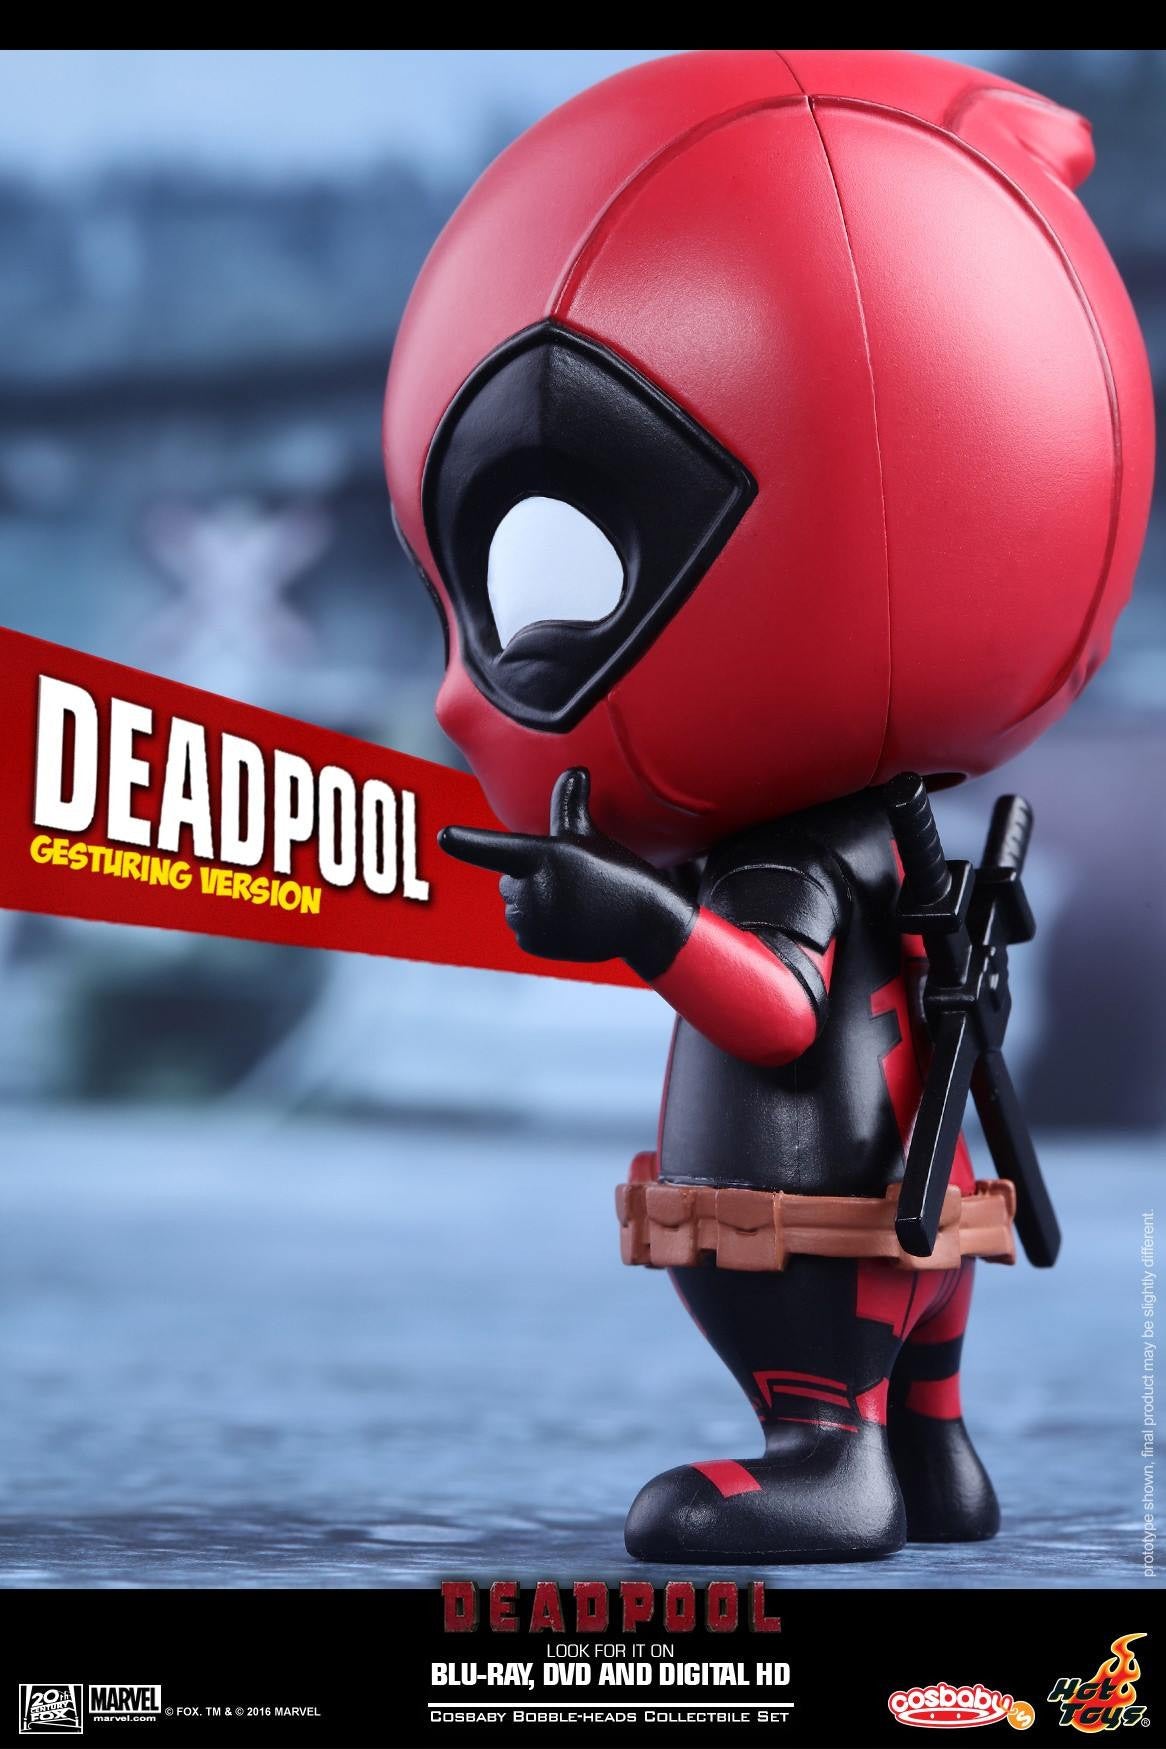 Hot Toys - COSB221 - Deadpool (Gesturing Version) Cosbaby Bobble-Head - Marvelous Toys - 3